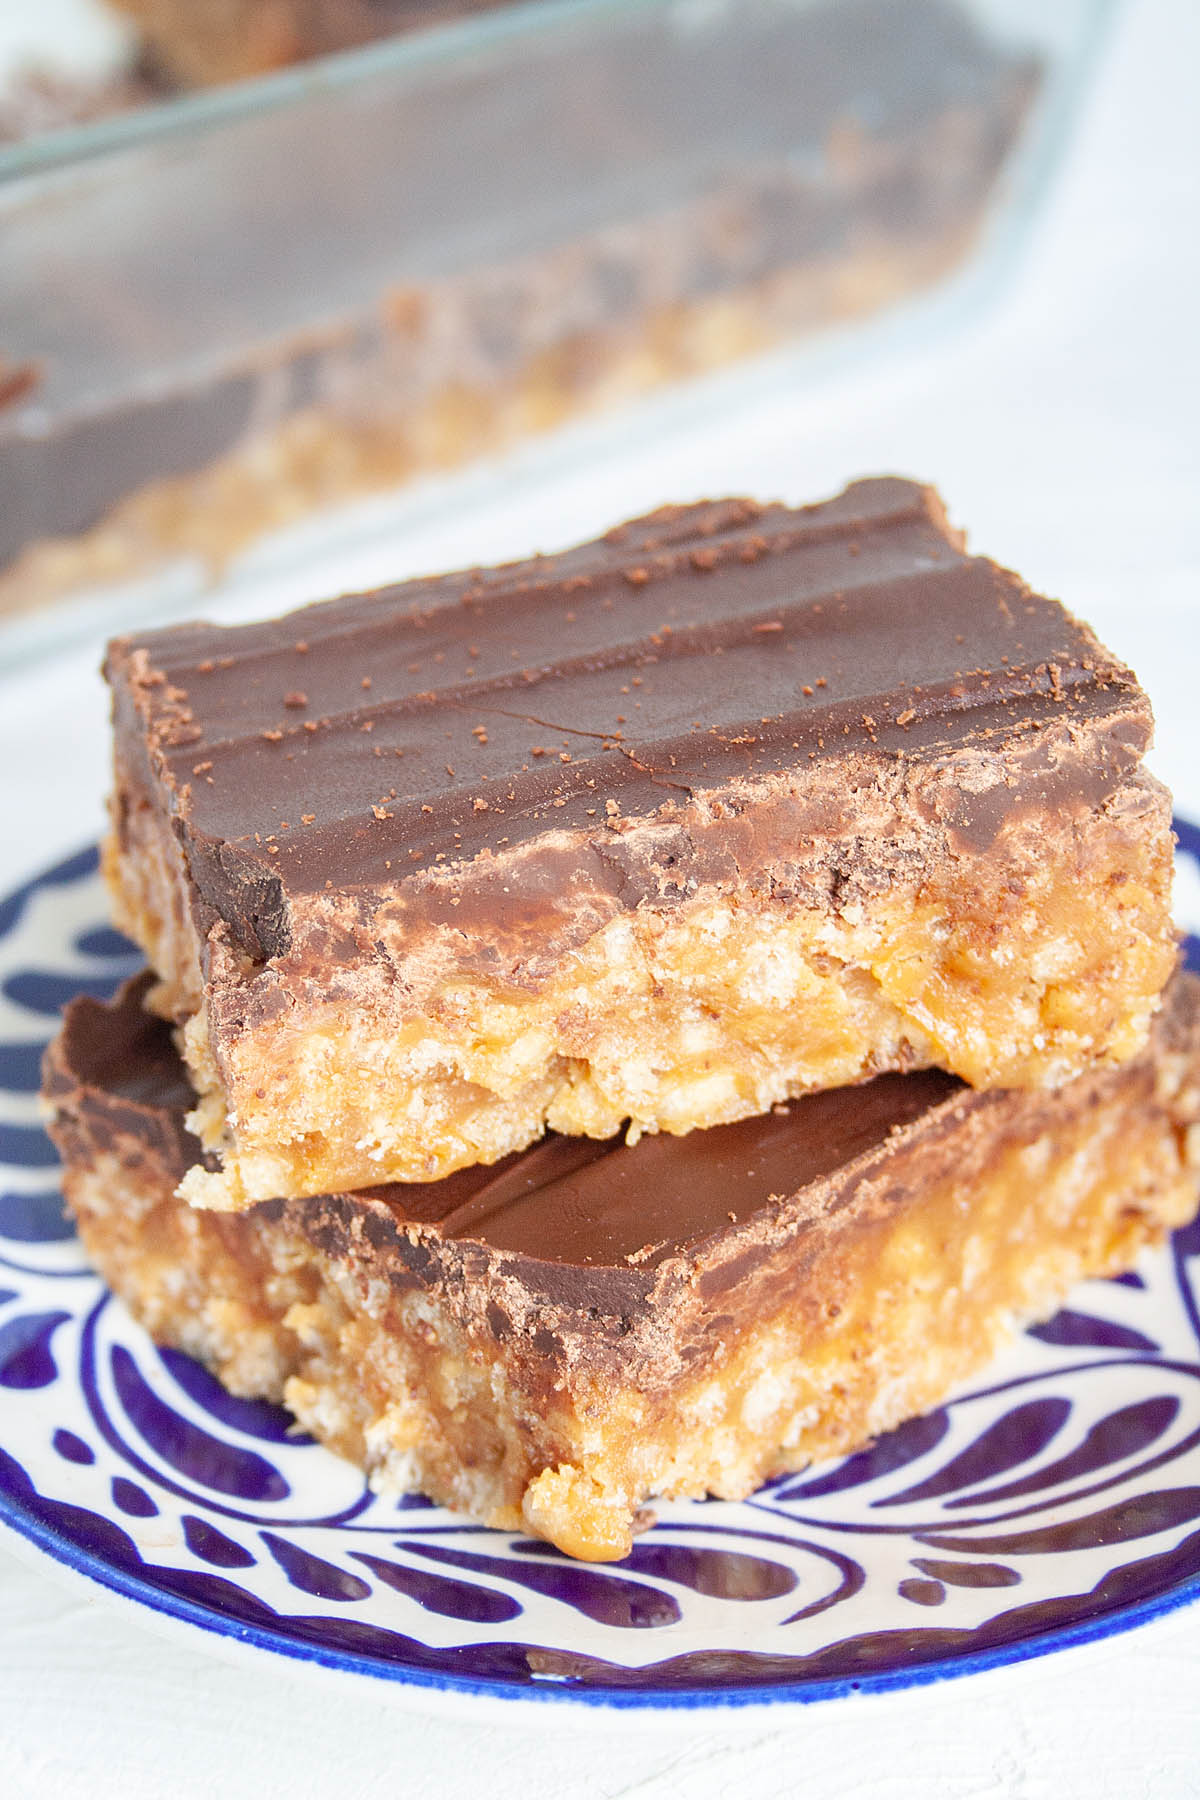 No-Bake Chocolate Peanut Butter Bars on a plate.